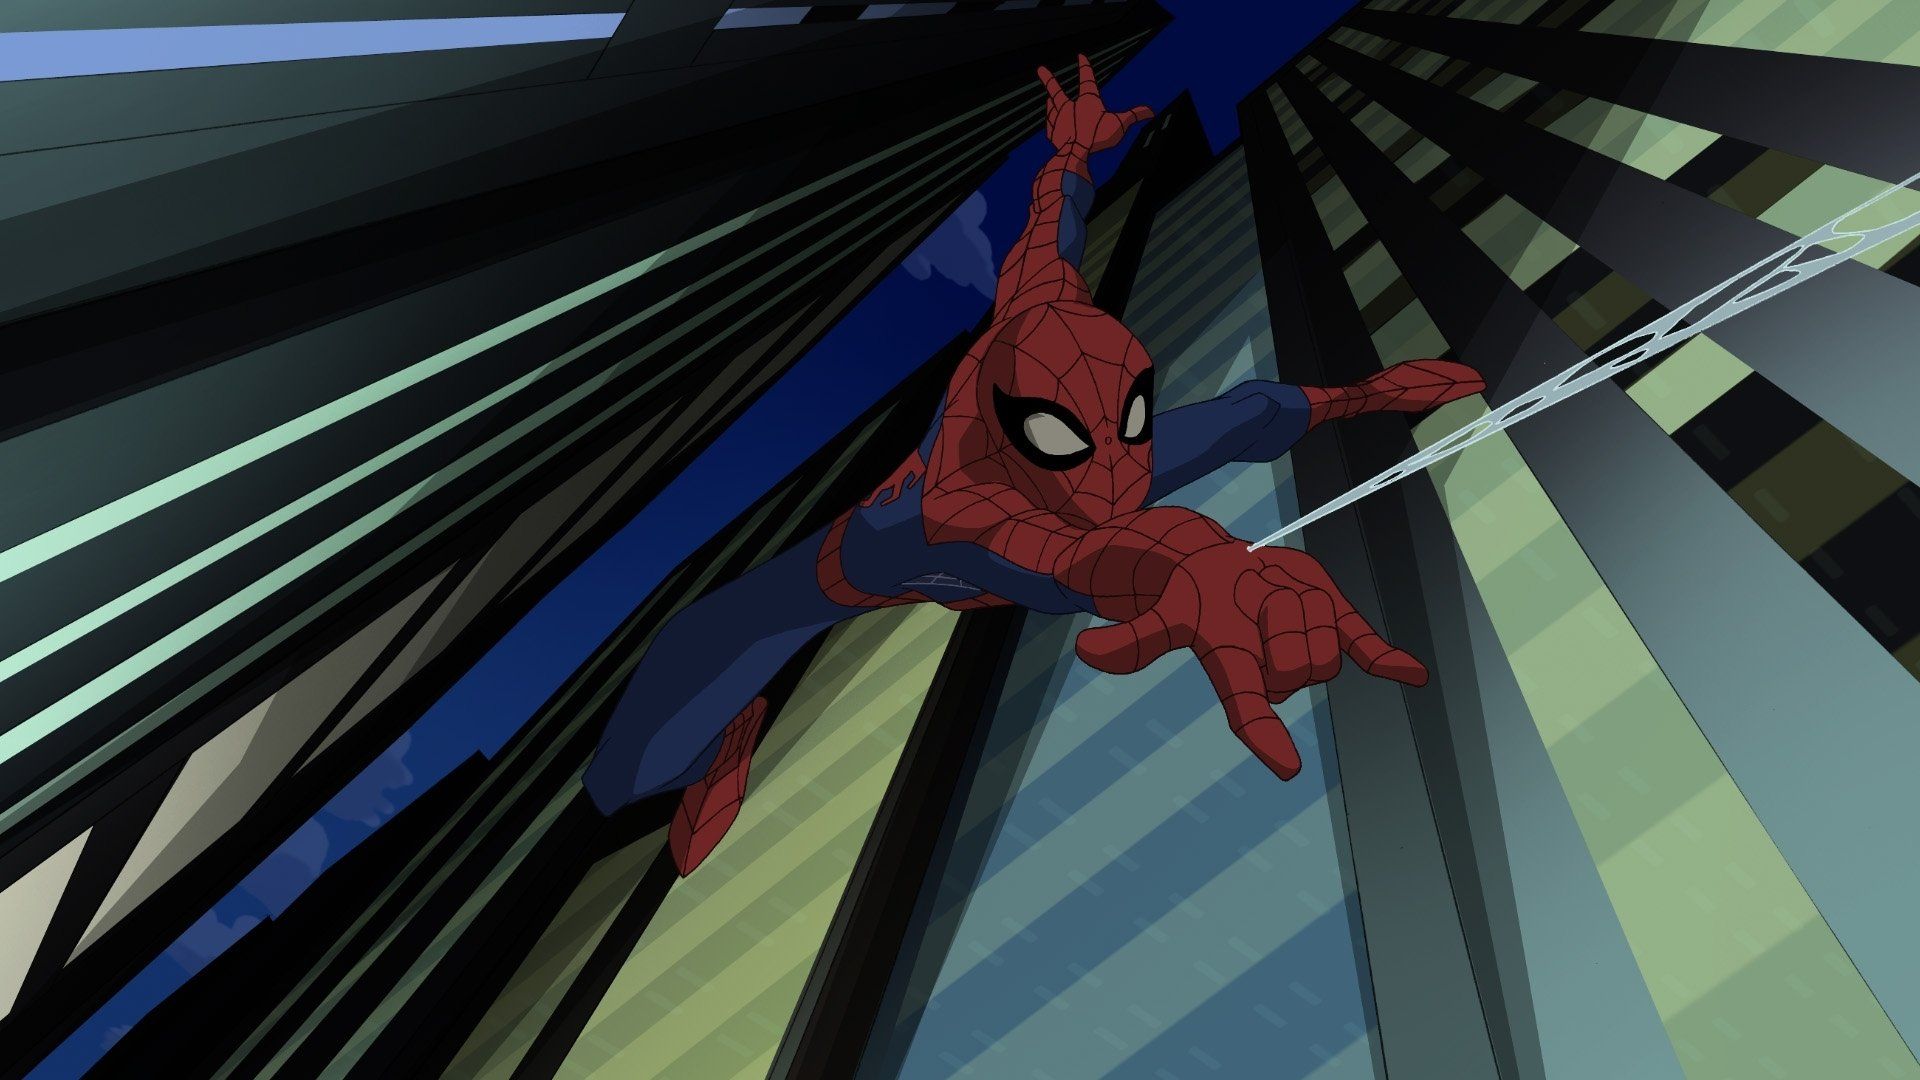 The Spectacular Spider Man Wallpaper. Spectacular Wallpaper, Radio City Christmas Spectacular Wallpaper And Spectacular Black Hole Wallpaper